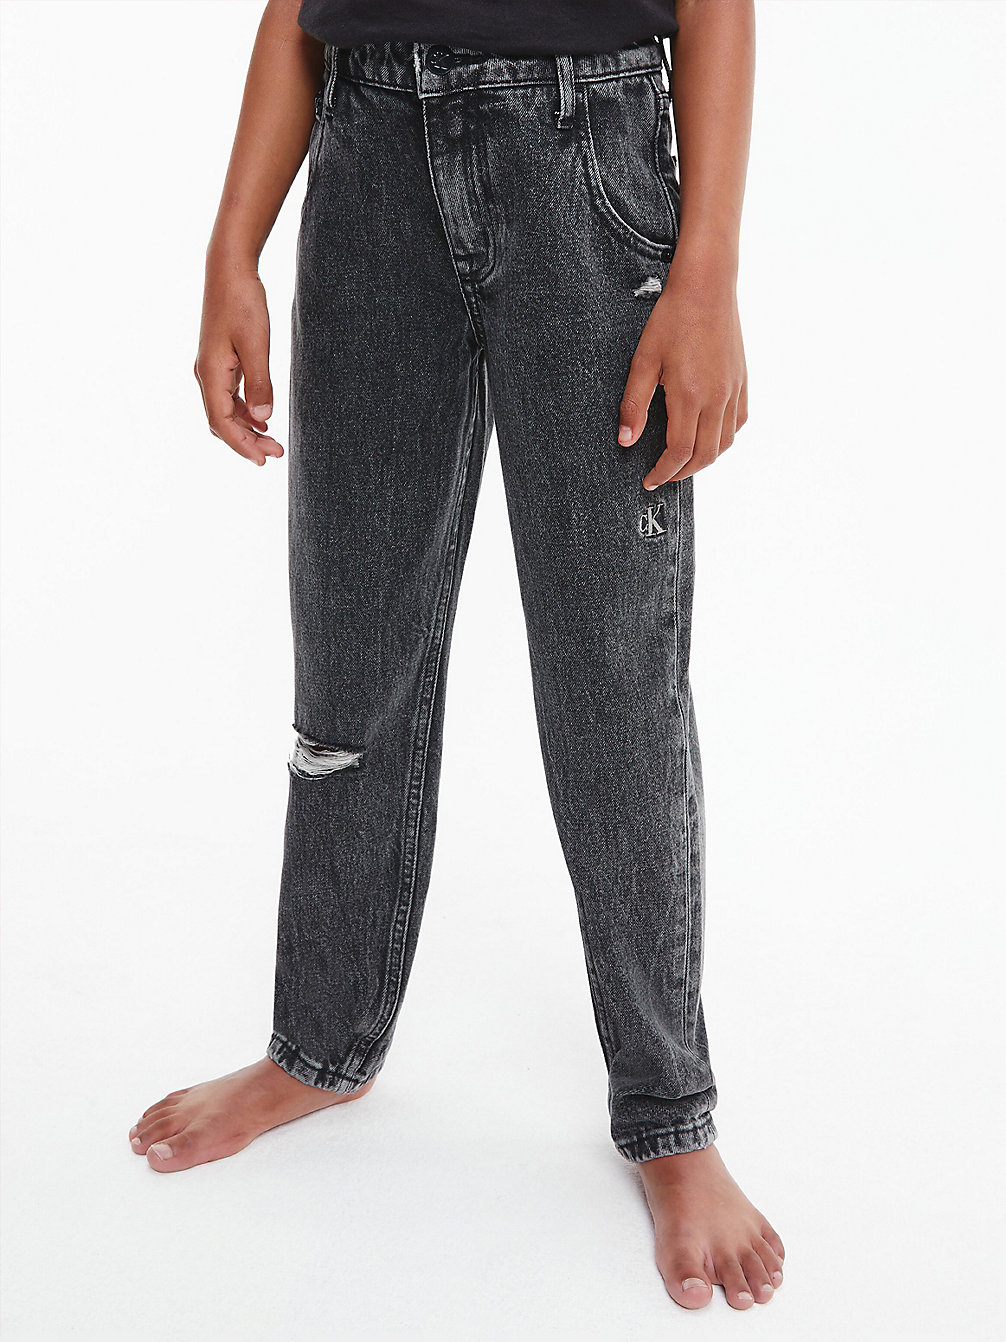 WASHED STONE GREY BLACK Jean Relaxed Barrel Leg undefined girls Calvin Klein